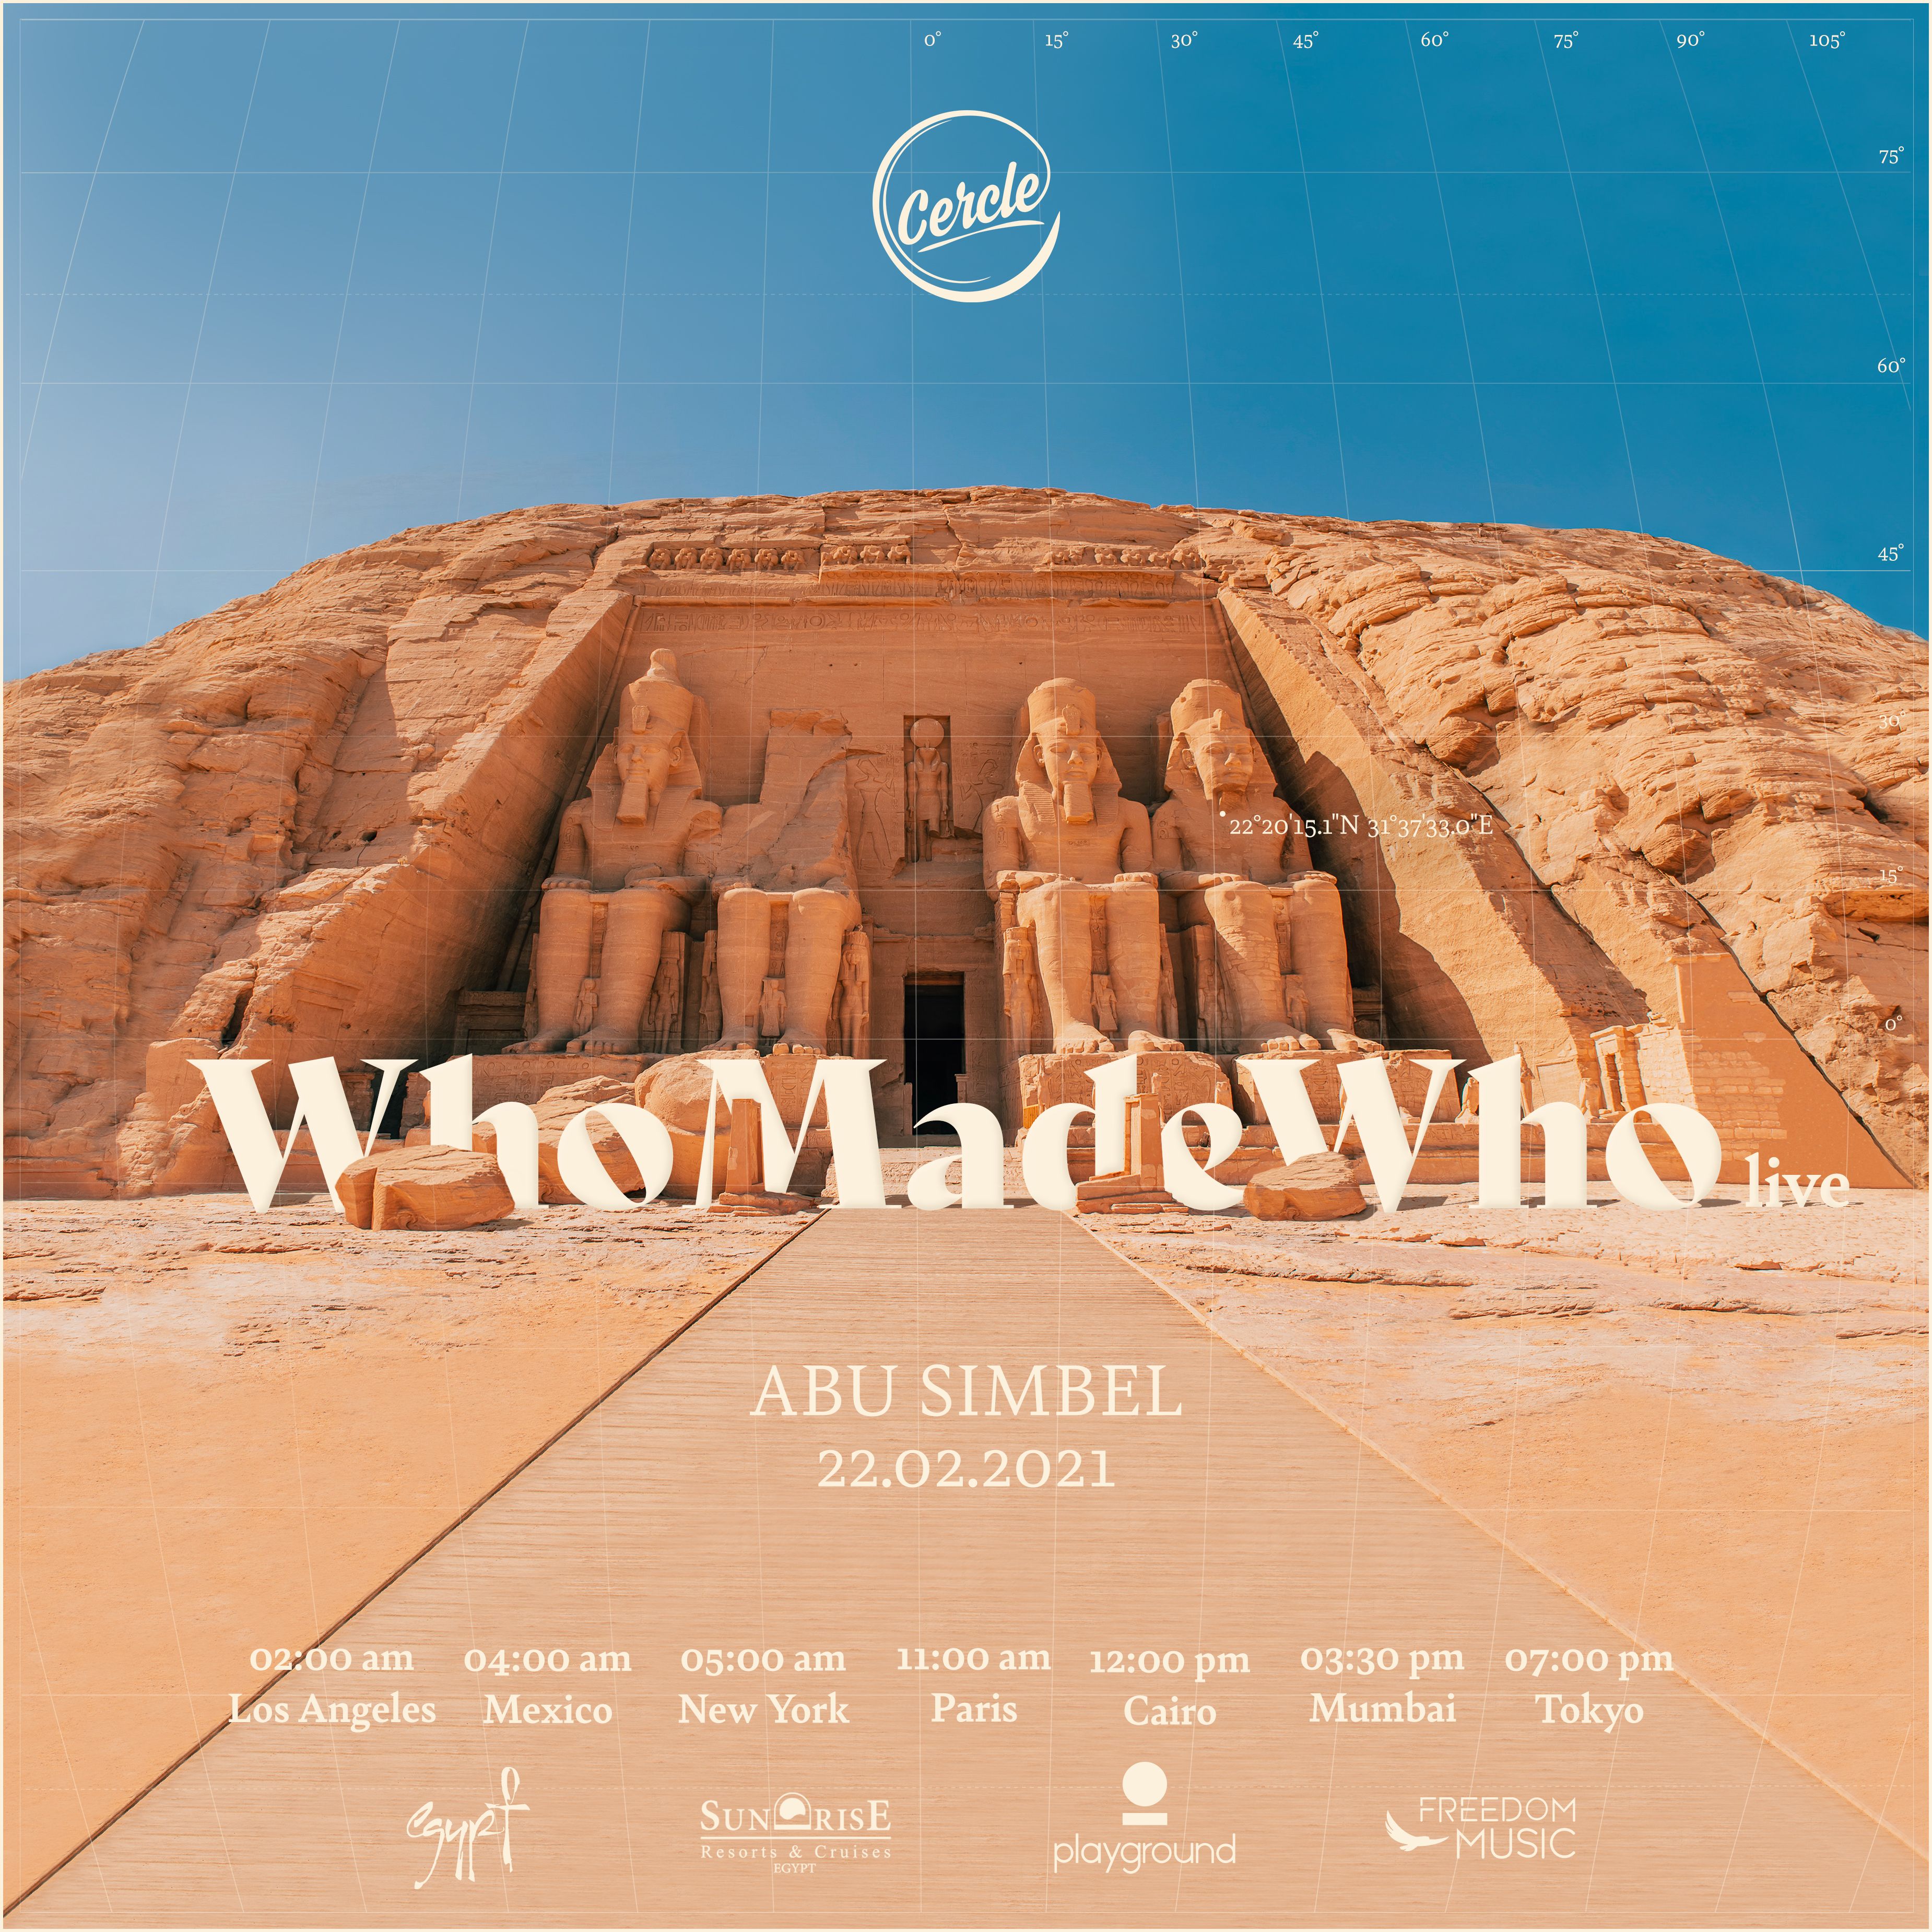 Download WhoMadeWho live at Abu Simbel, Egypt for Cercle